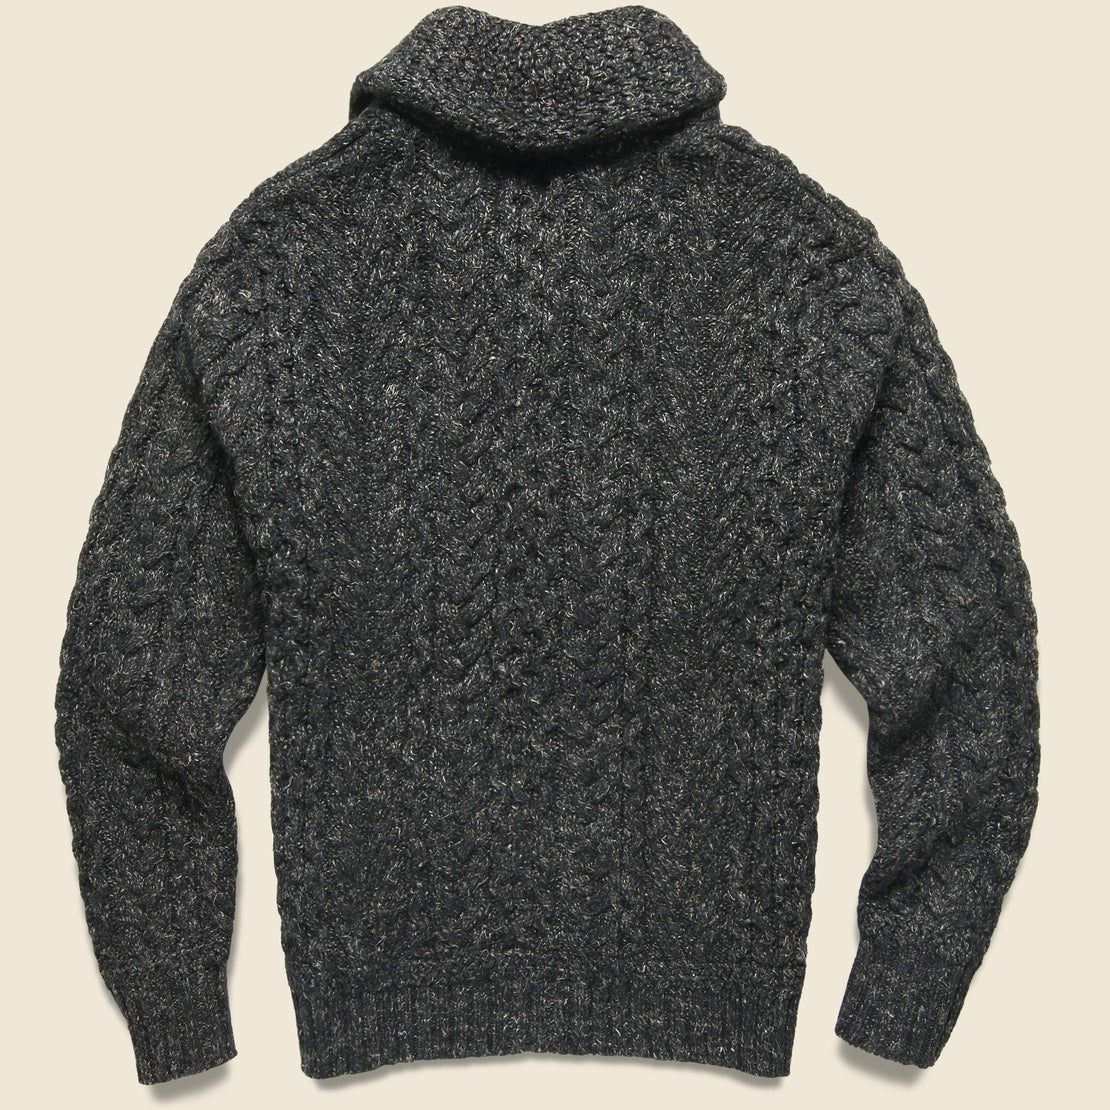 Cable Shawl Cardigan - Dark Charcoal Heather - RRL - STAG Provisions - Tops - Sweater